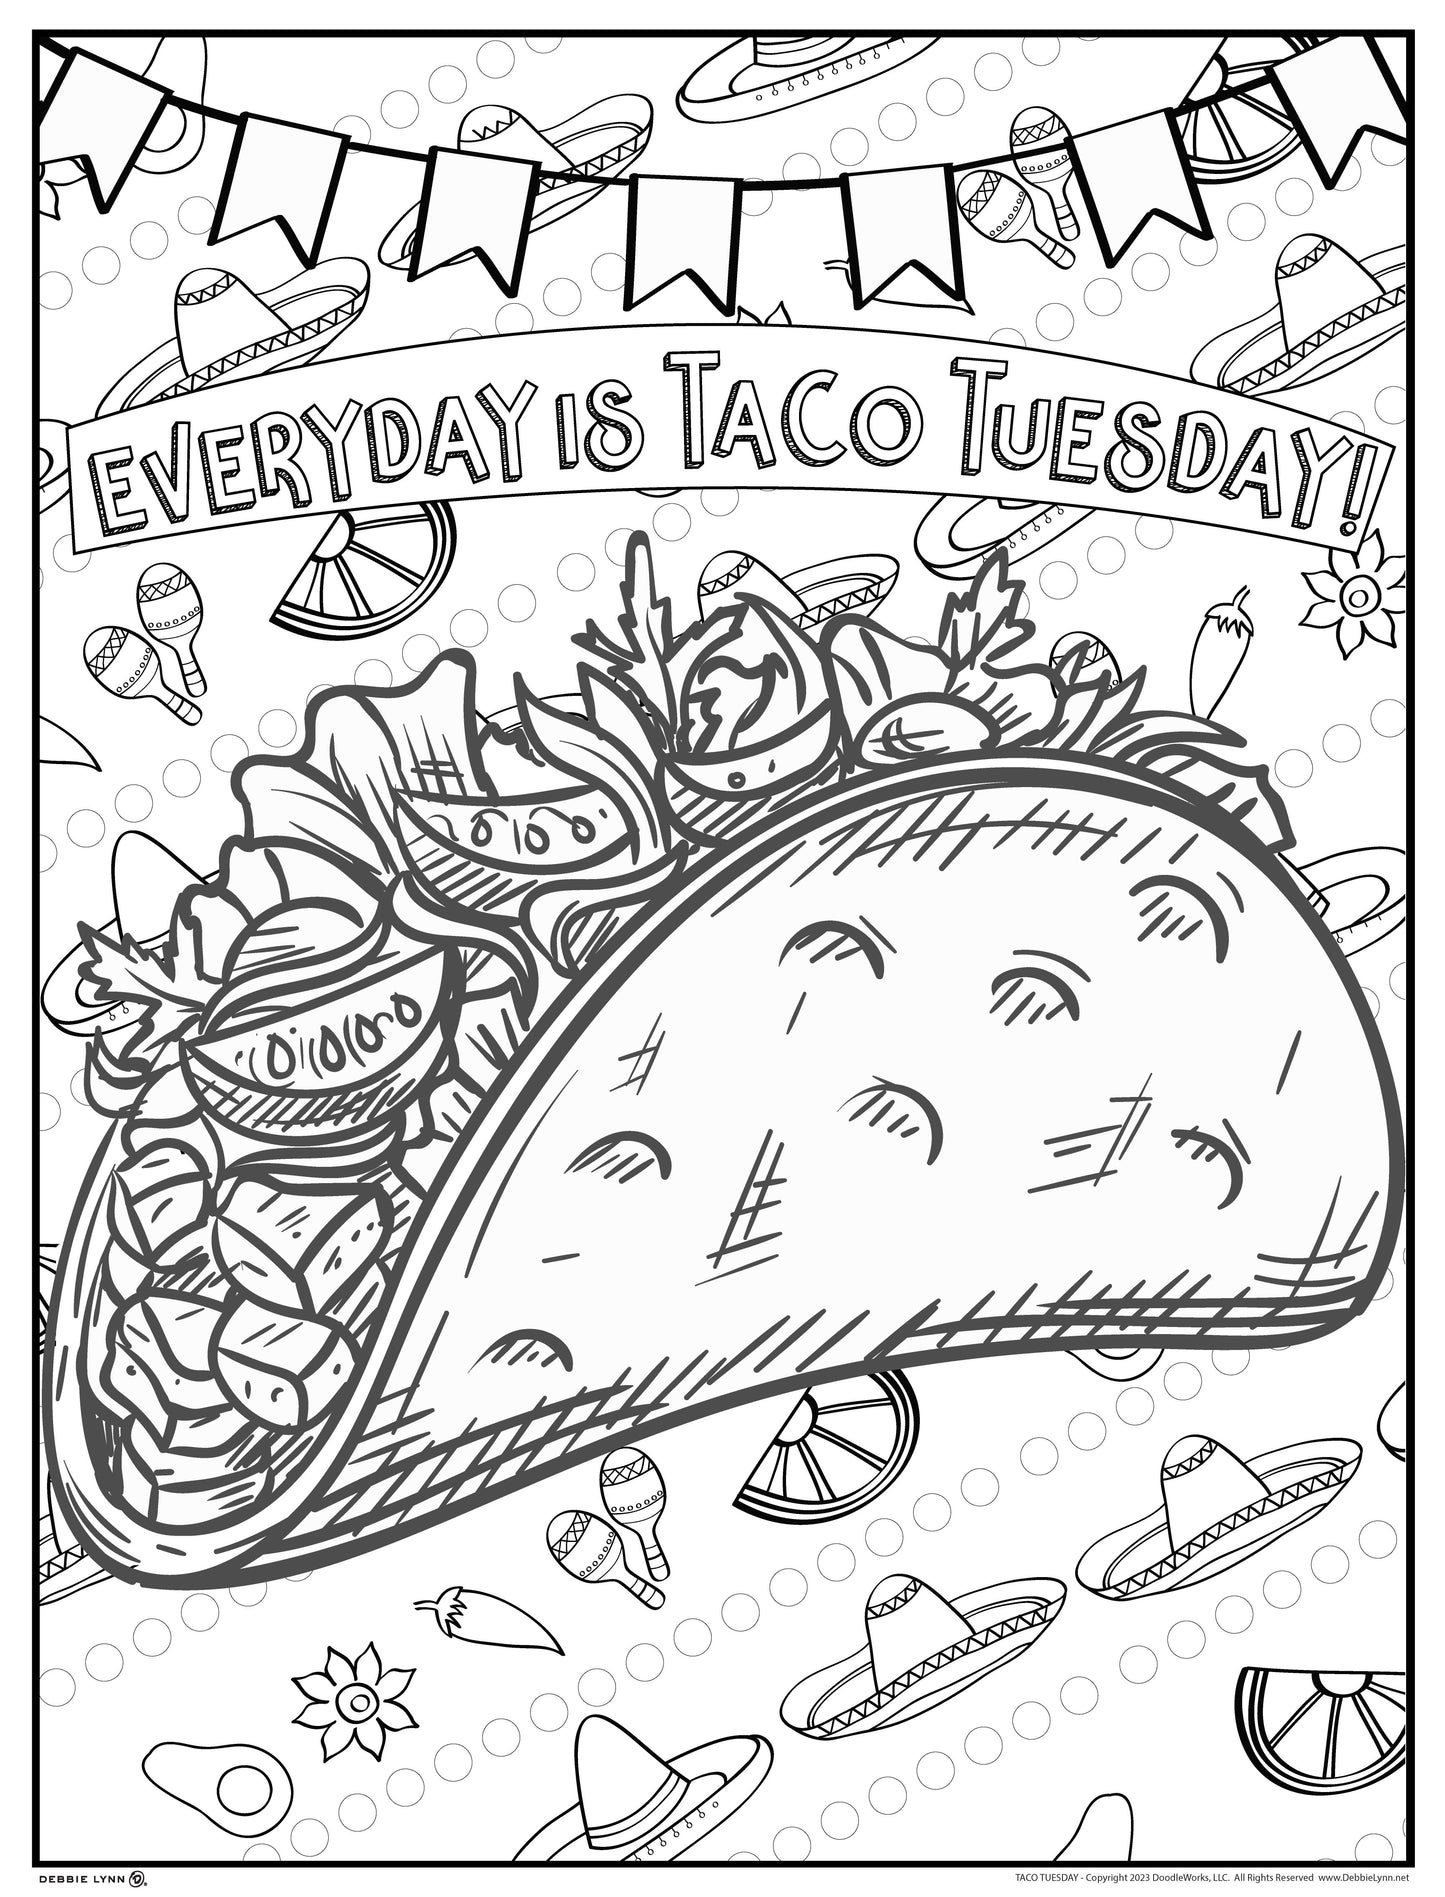 Tacos Personalized Giant Coloring Poster 46"x60"